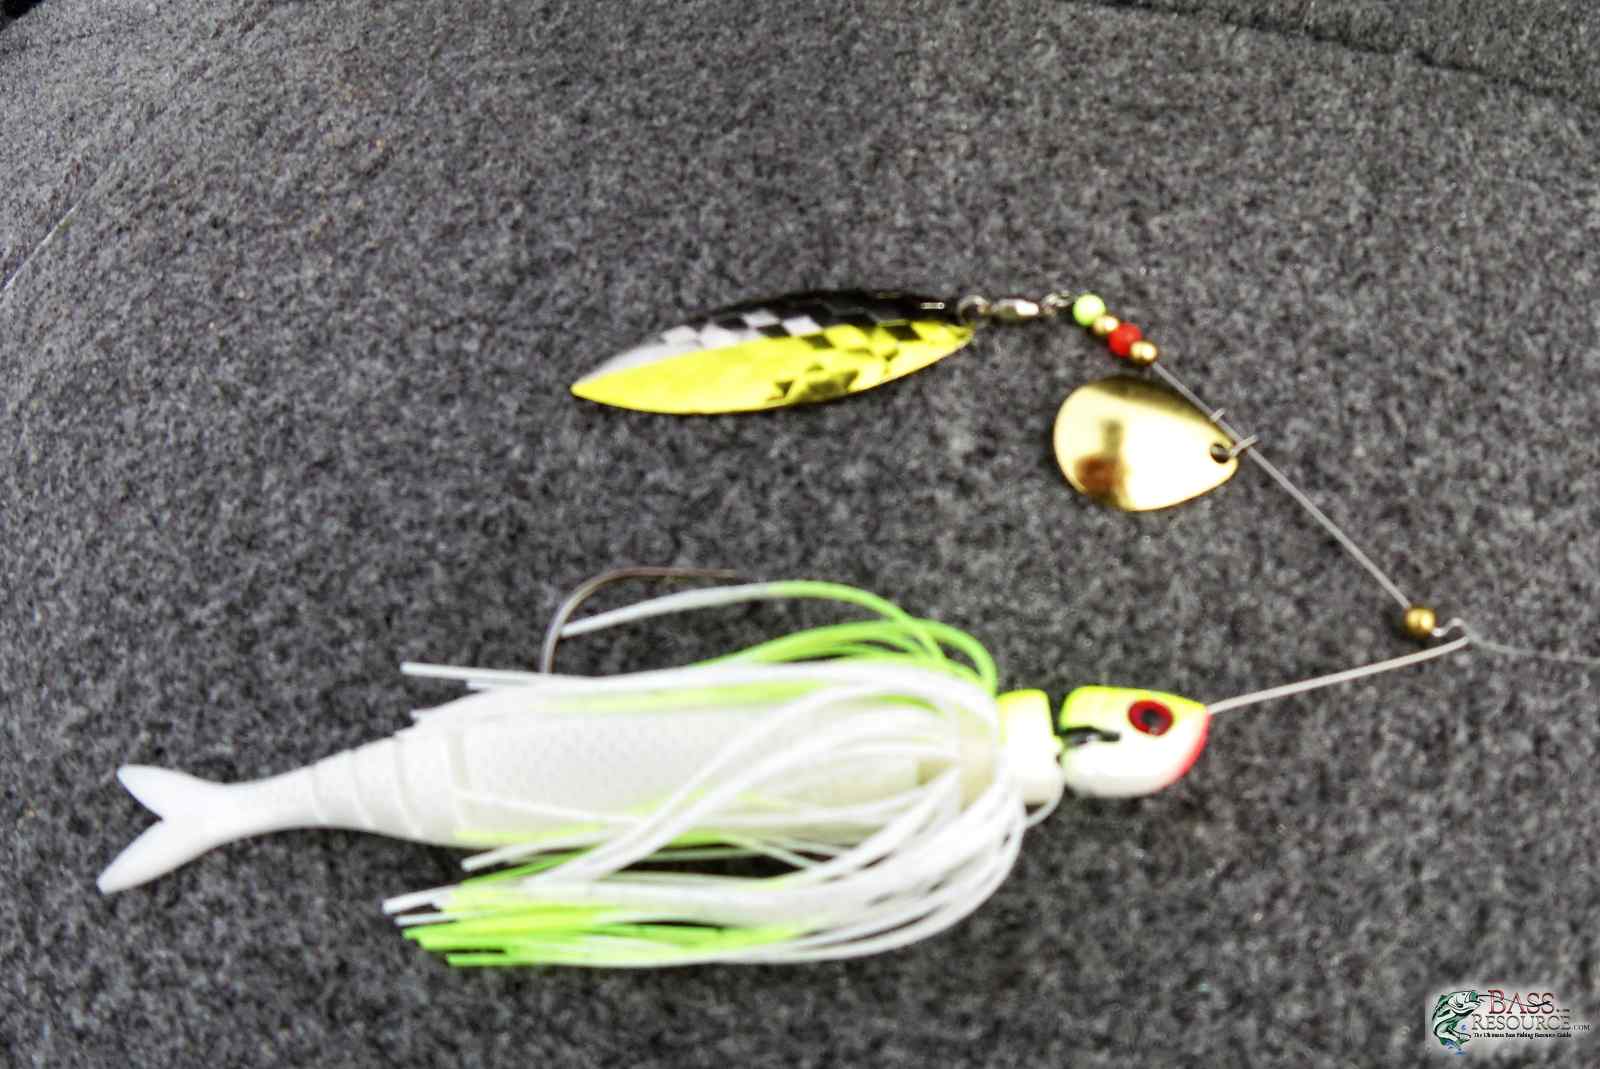 Anyone still throwing a single Colorado blade spinnerbait? - Page 2 -  Fishing Tackle - Bass Fishing Forums